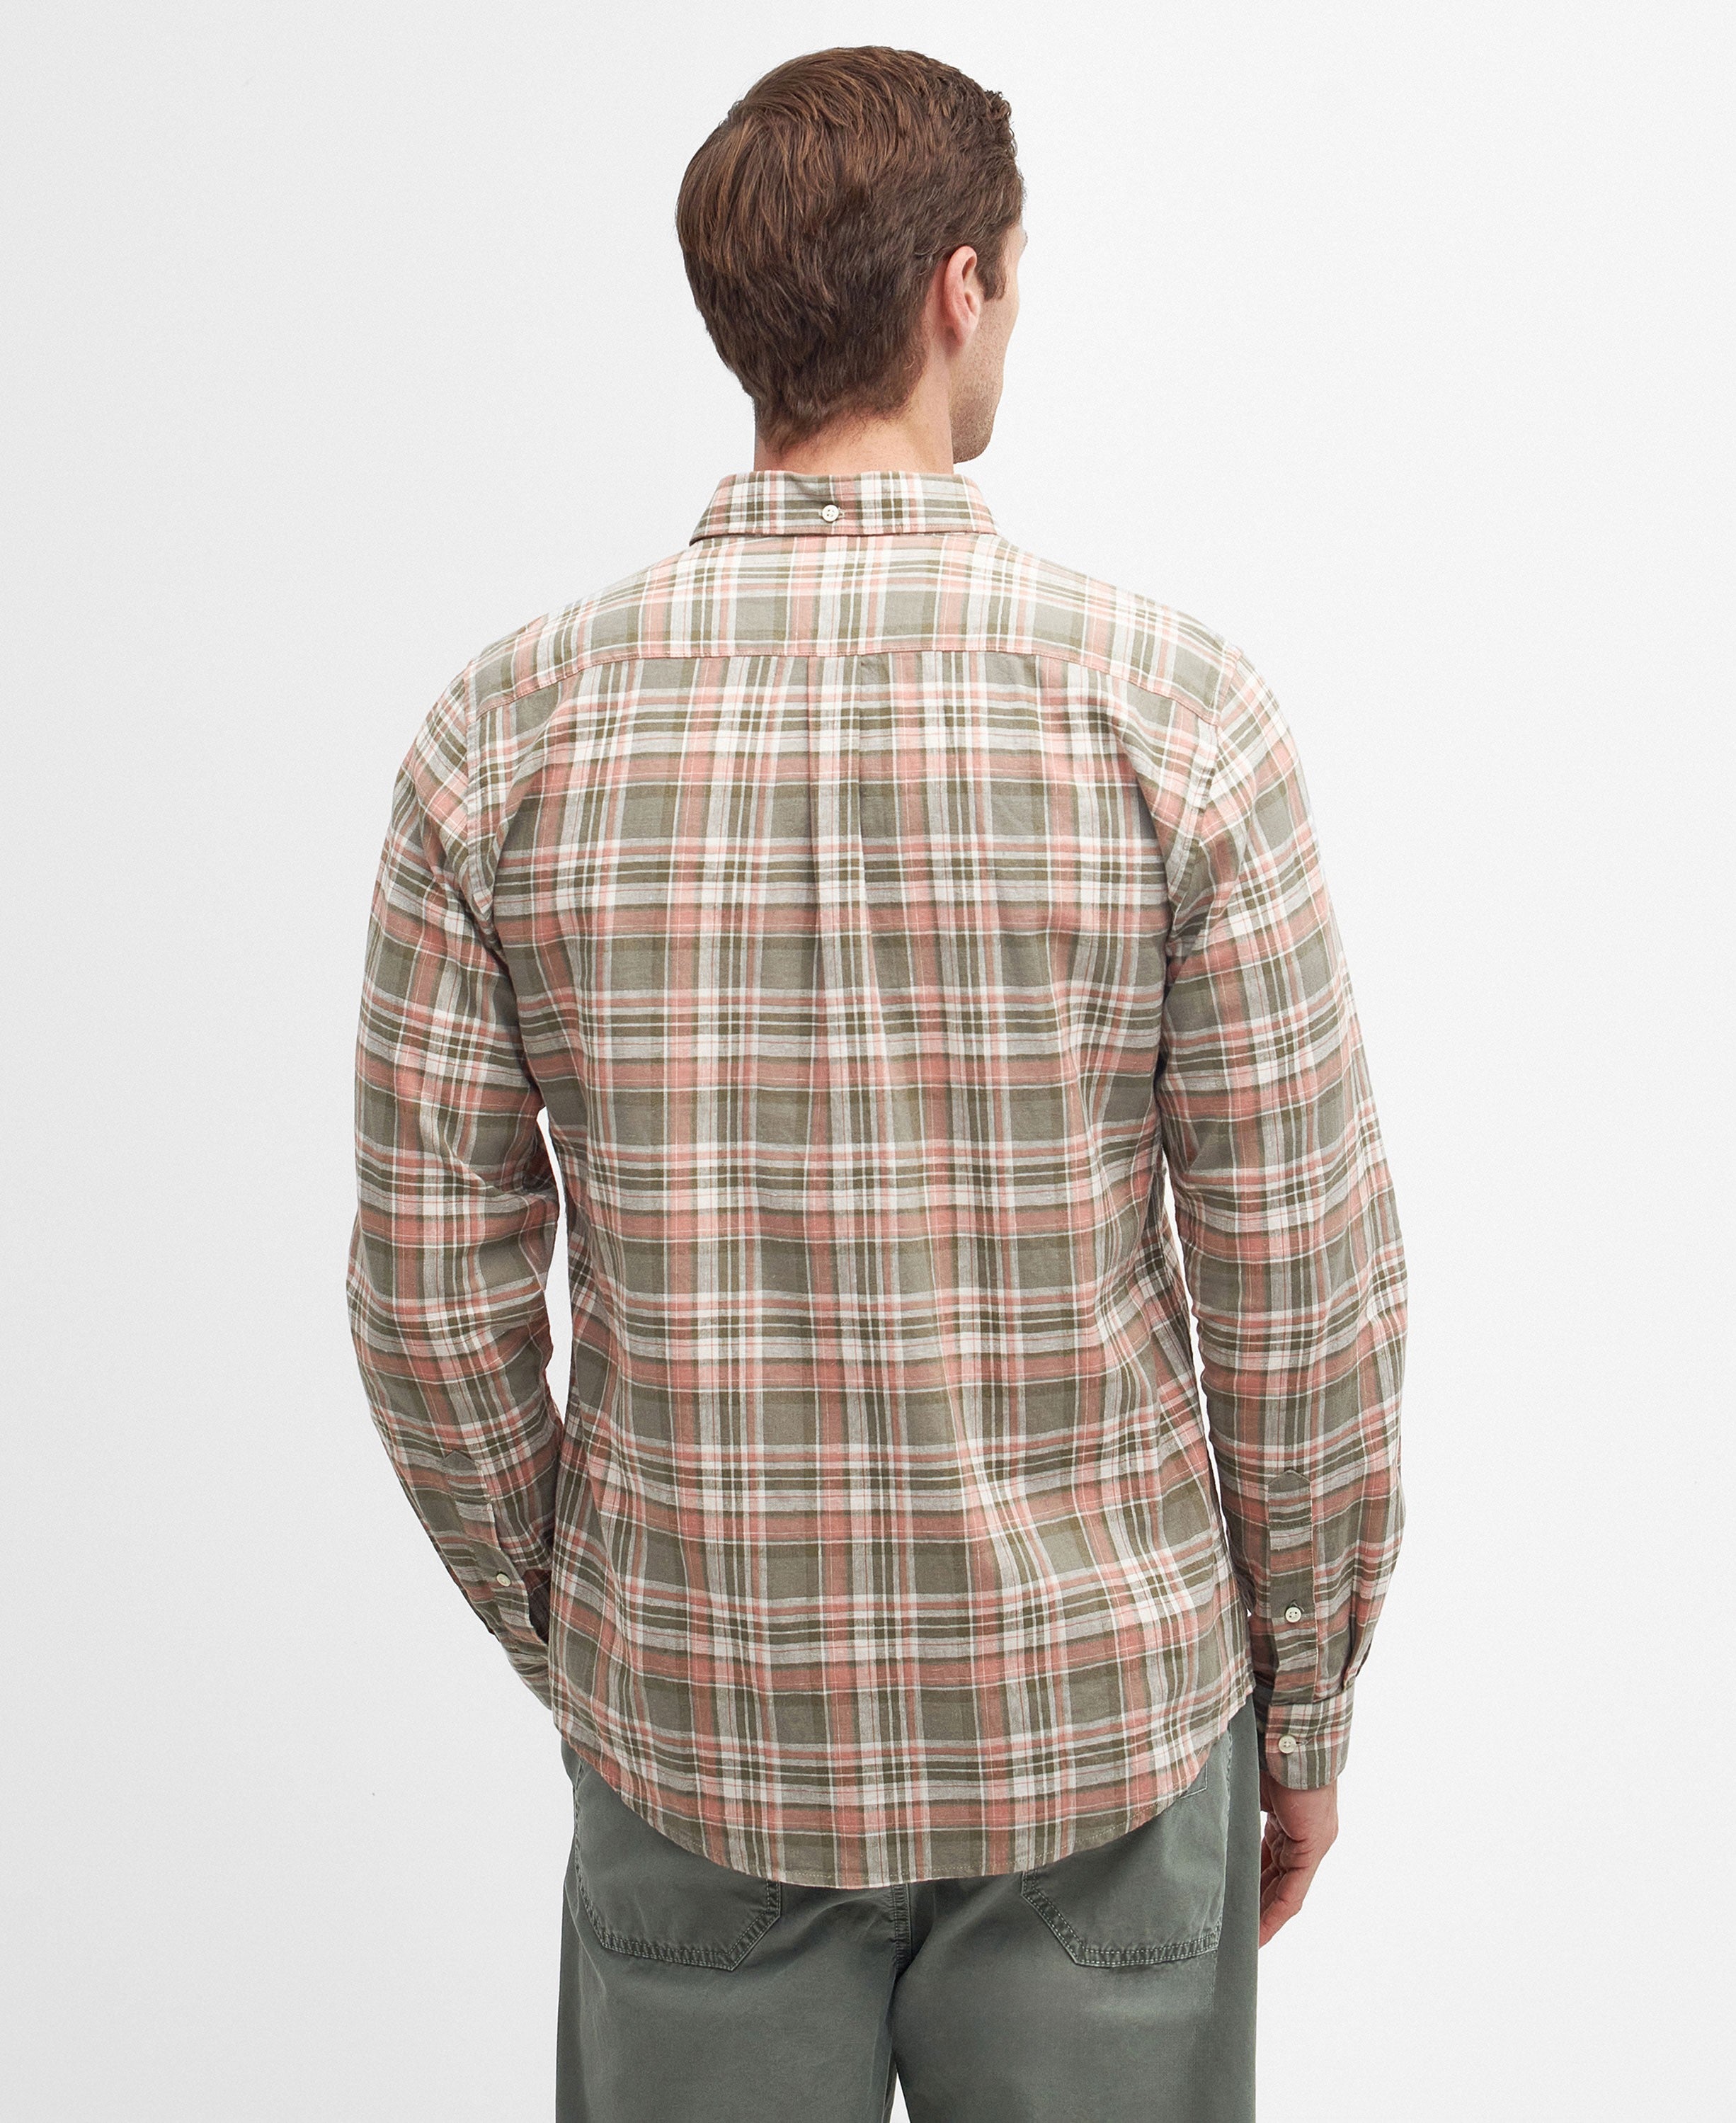 Mowbray Tailored Shirt - Olive